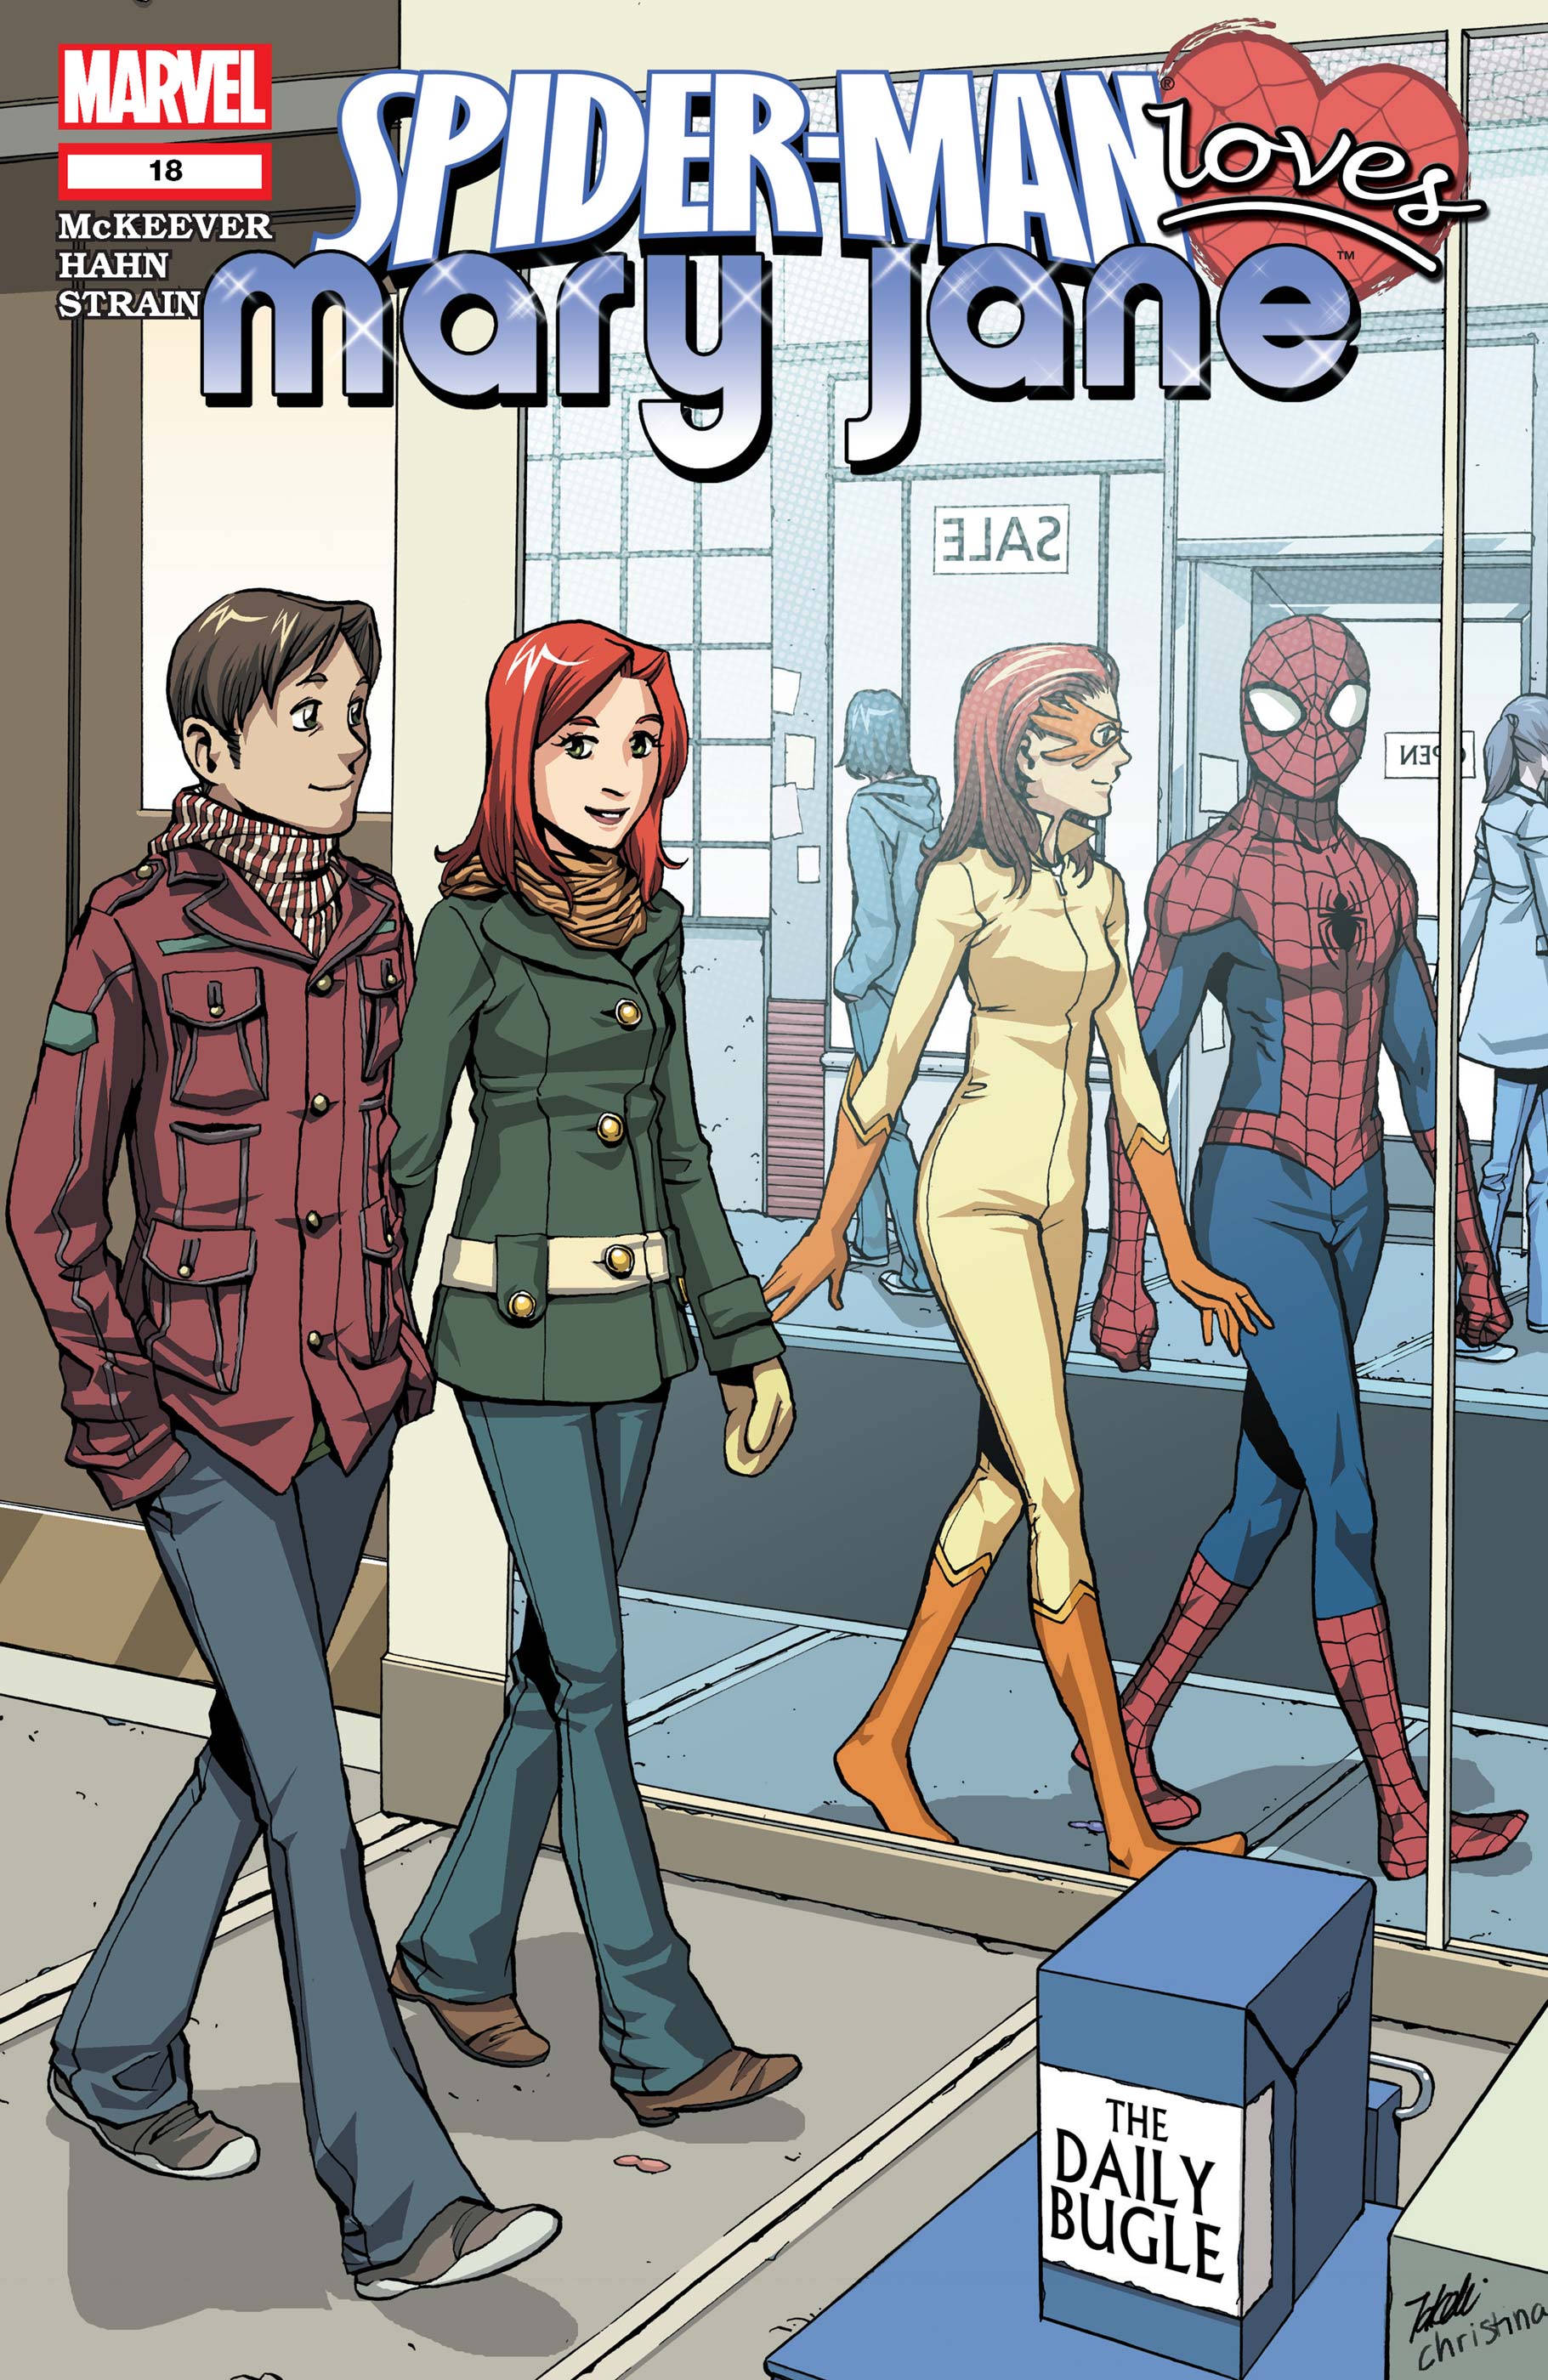 Spider-Man Loves Mary Jane (2005) #18 | Comic Issues | Marvel